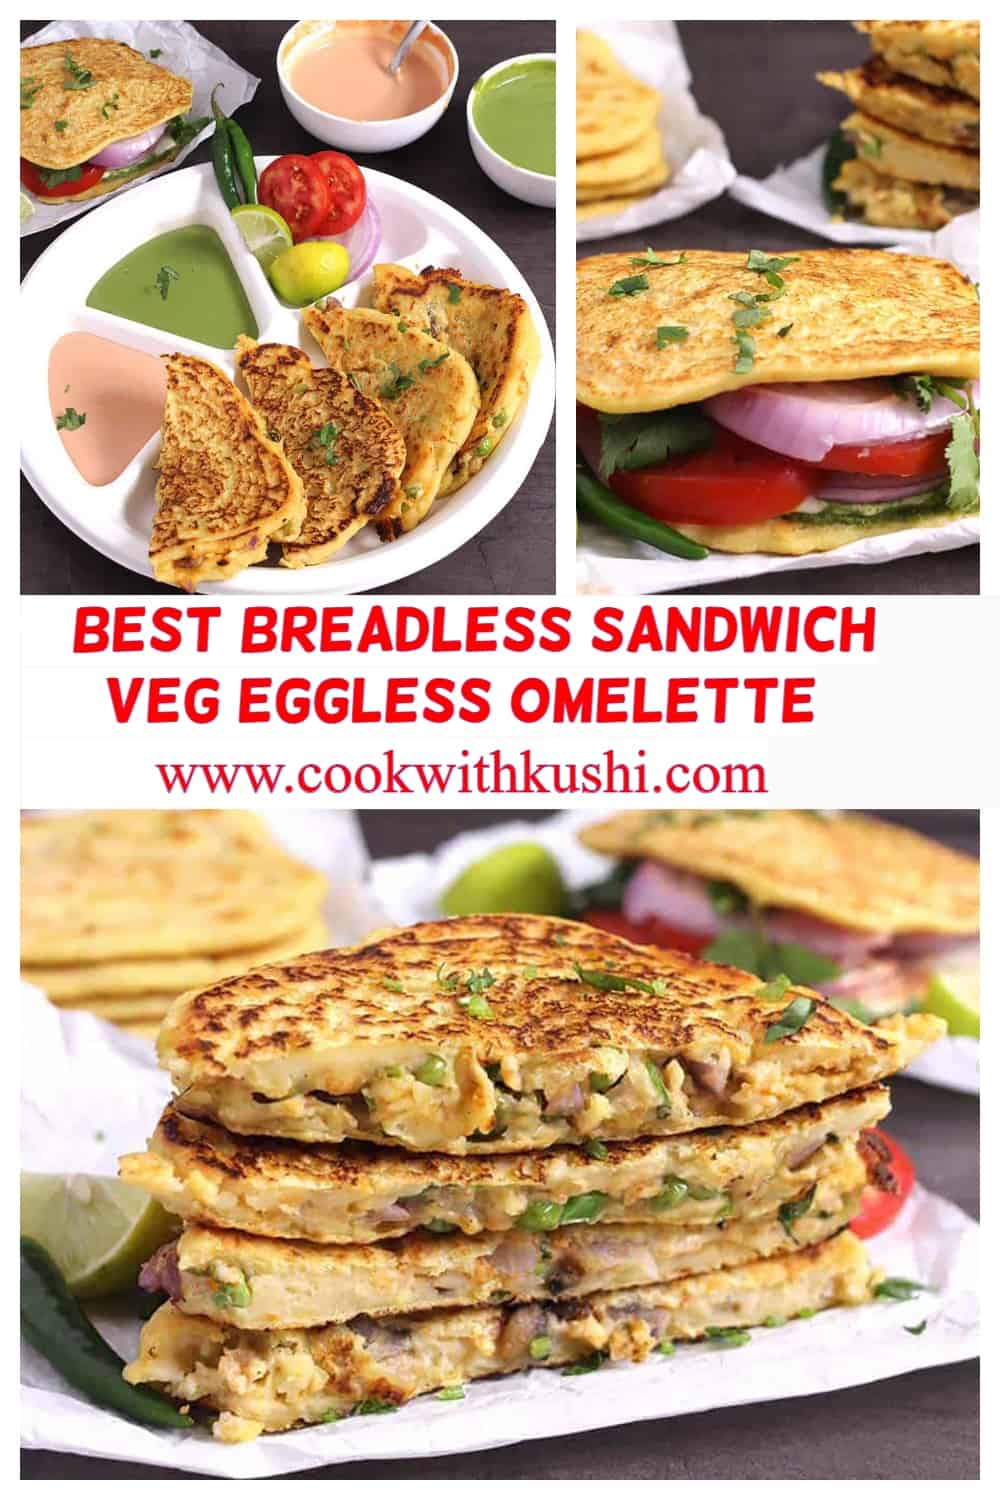 different ways of serving sandwich without bread, breadless sandwich, eggless omelette